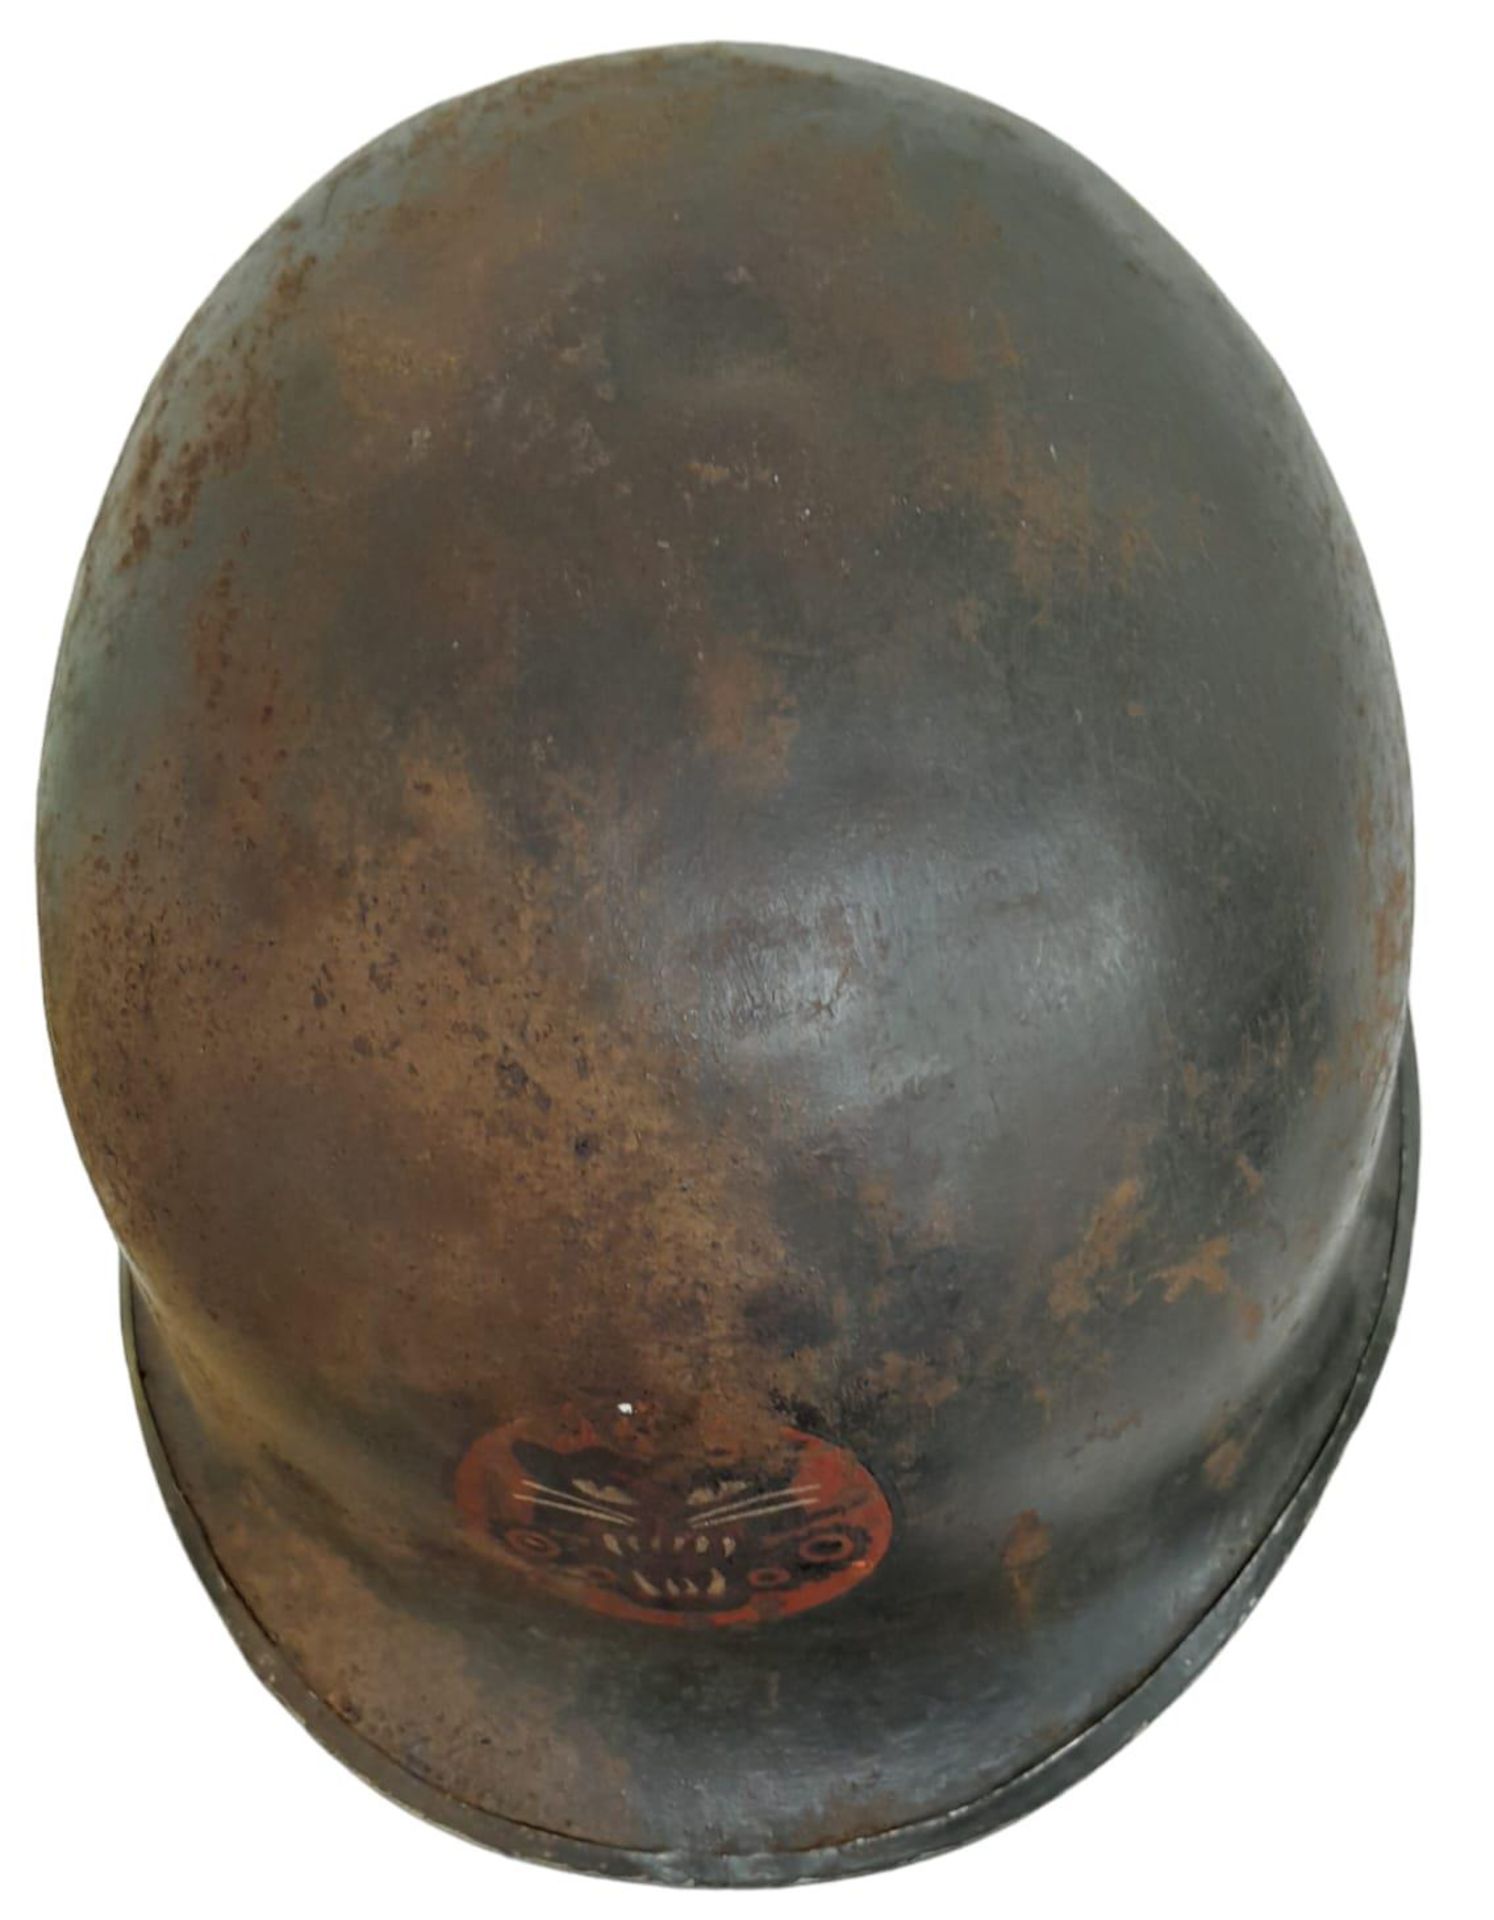 WW2 US Front Seam Swivel Bale M1 Helmet. Badged to a Tank Destroyer Unit. Found in a junk shop - Image 5 of 9